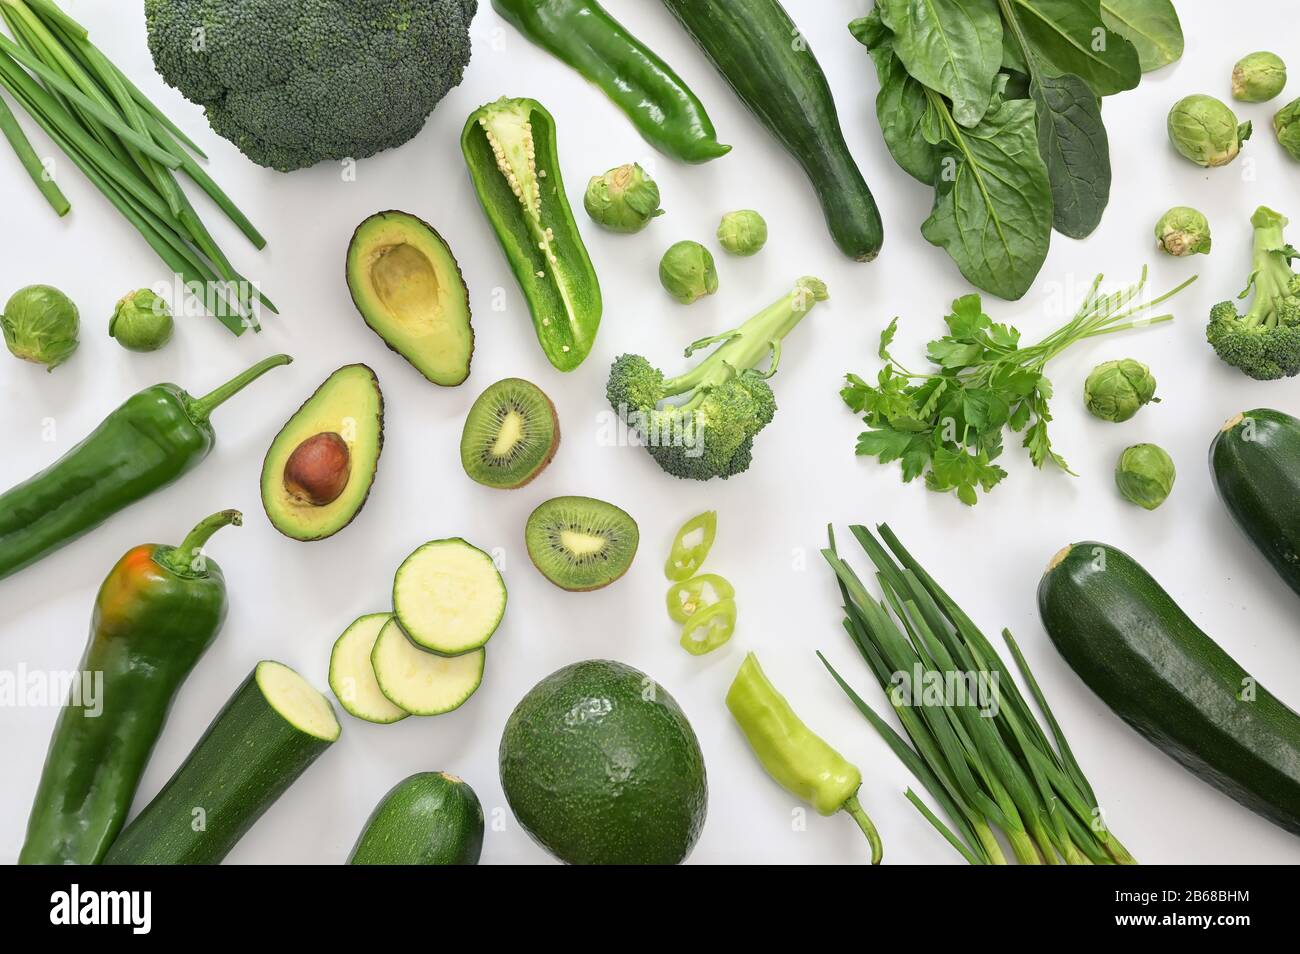 Group Of Green Vegetables And Fruits On White Background Stock Photo